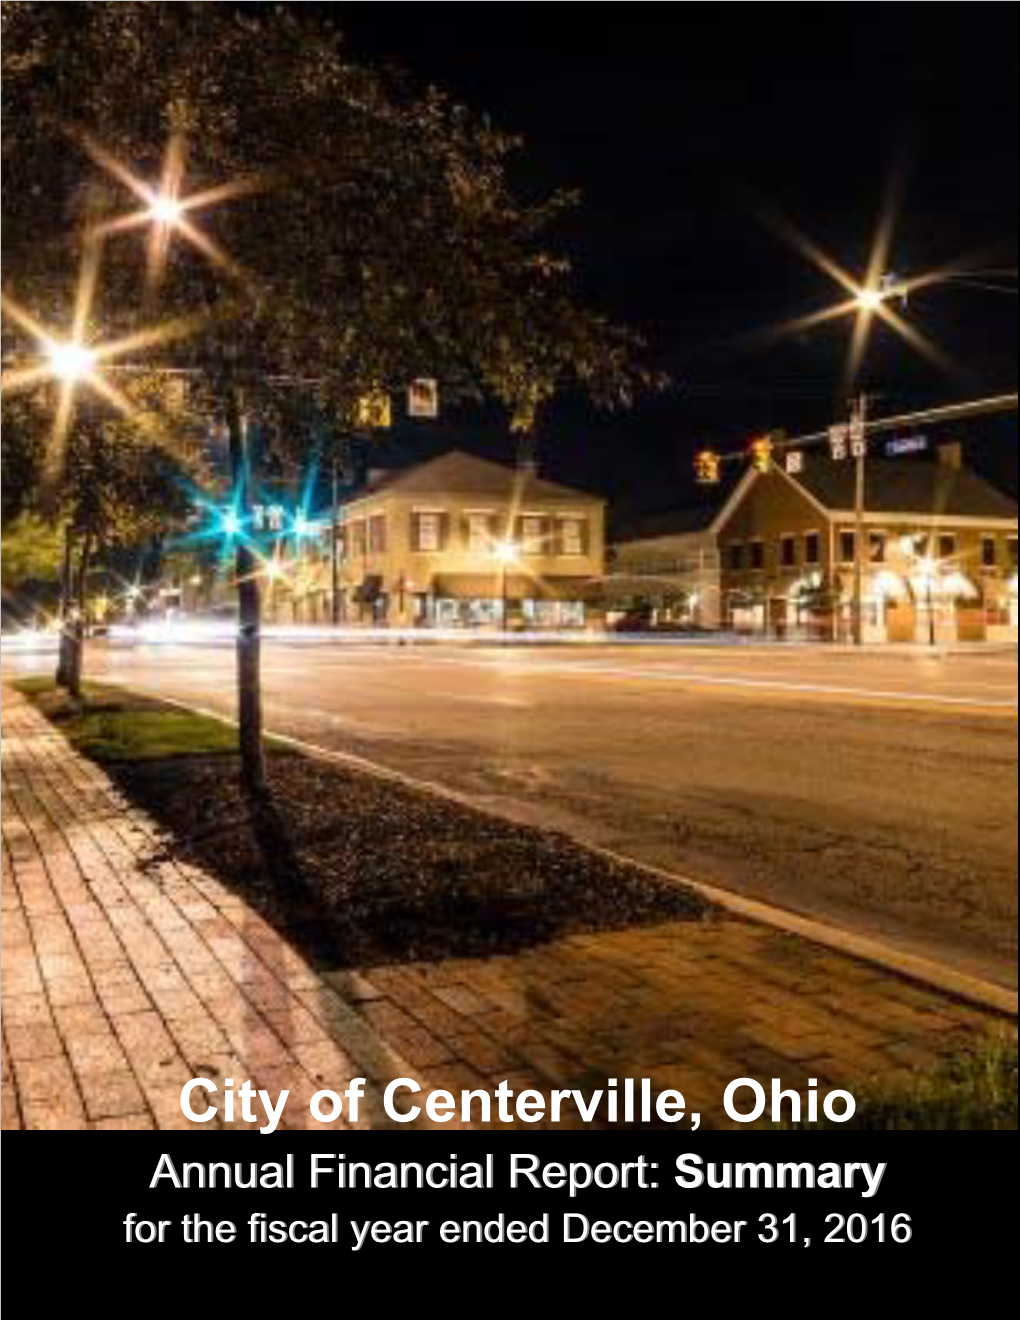 City of Centerville 2016 Annual Report Summary V0